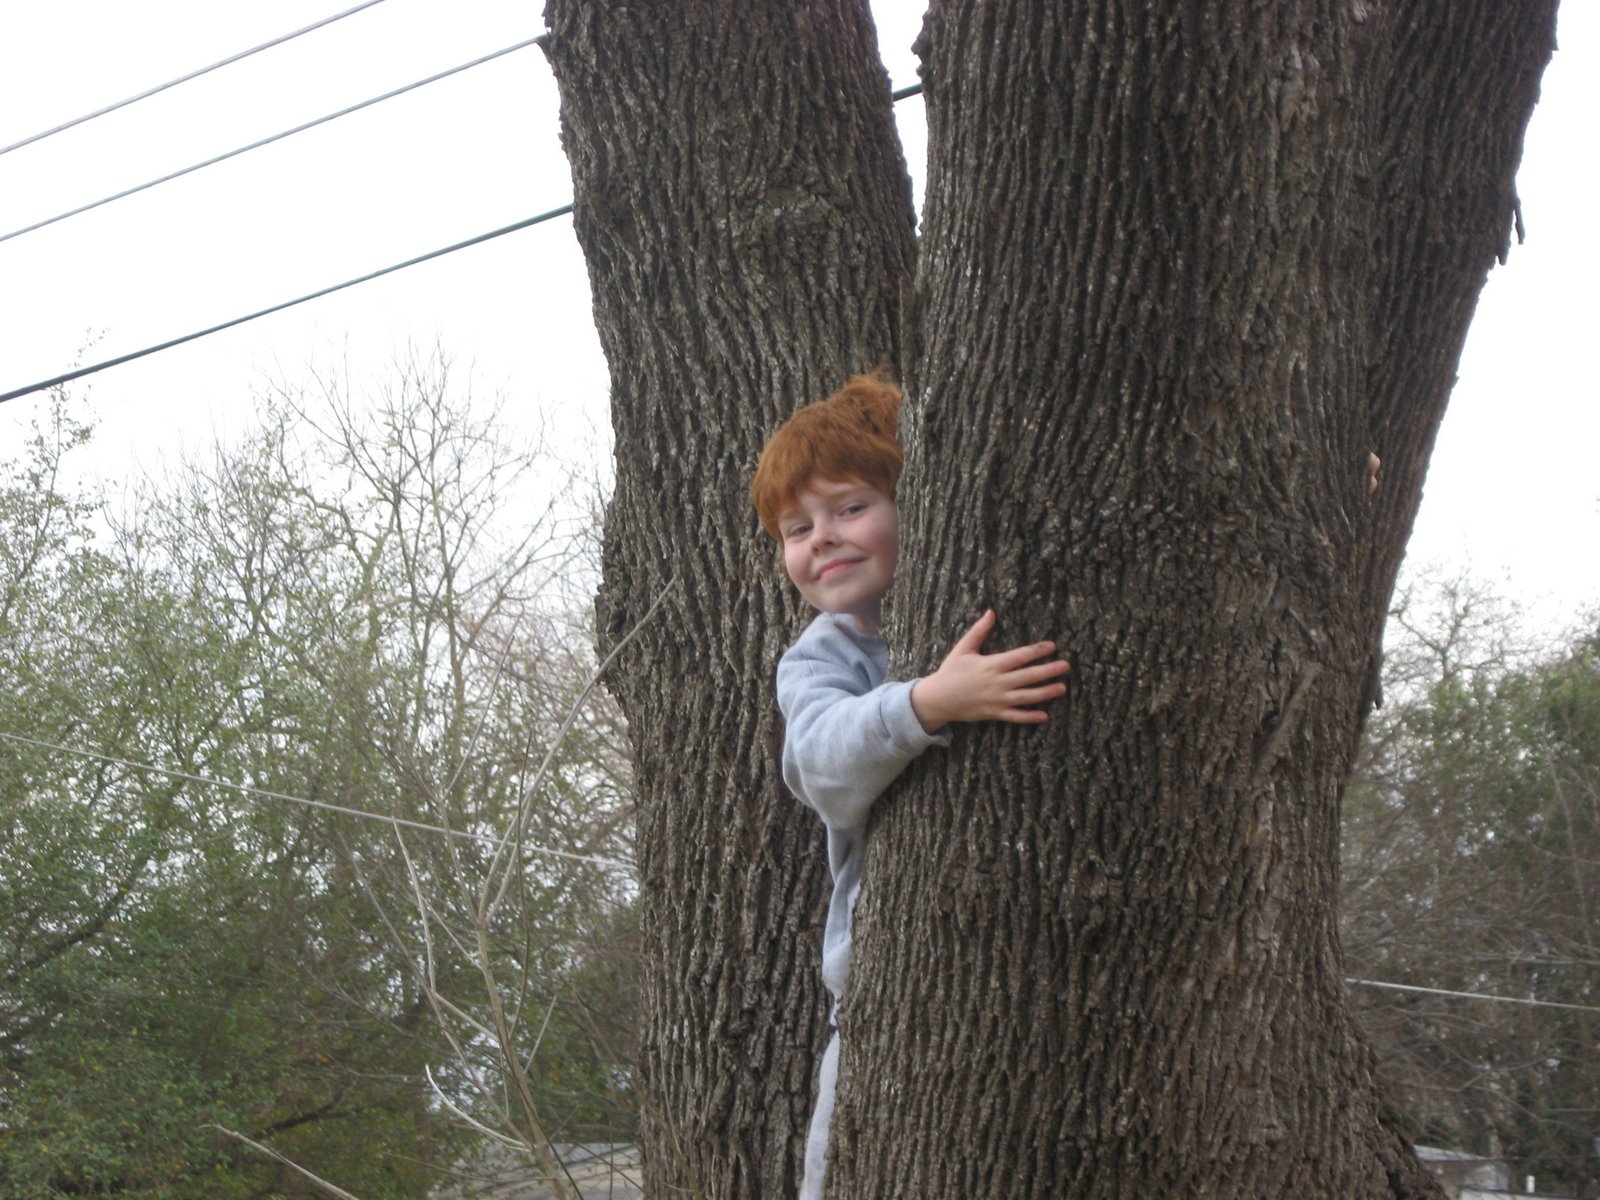 [max+in+the+tree.JPG]